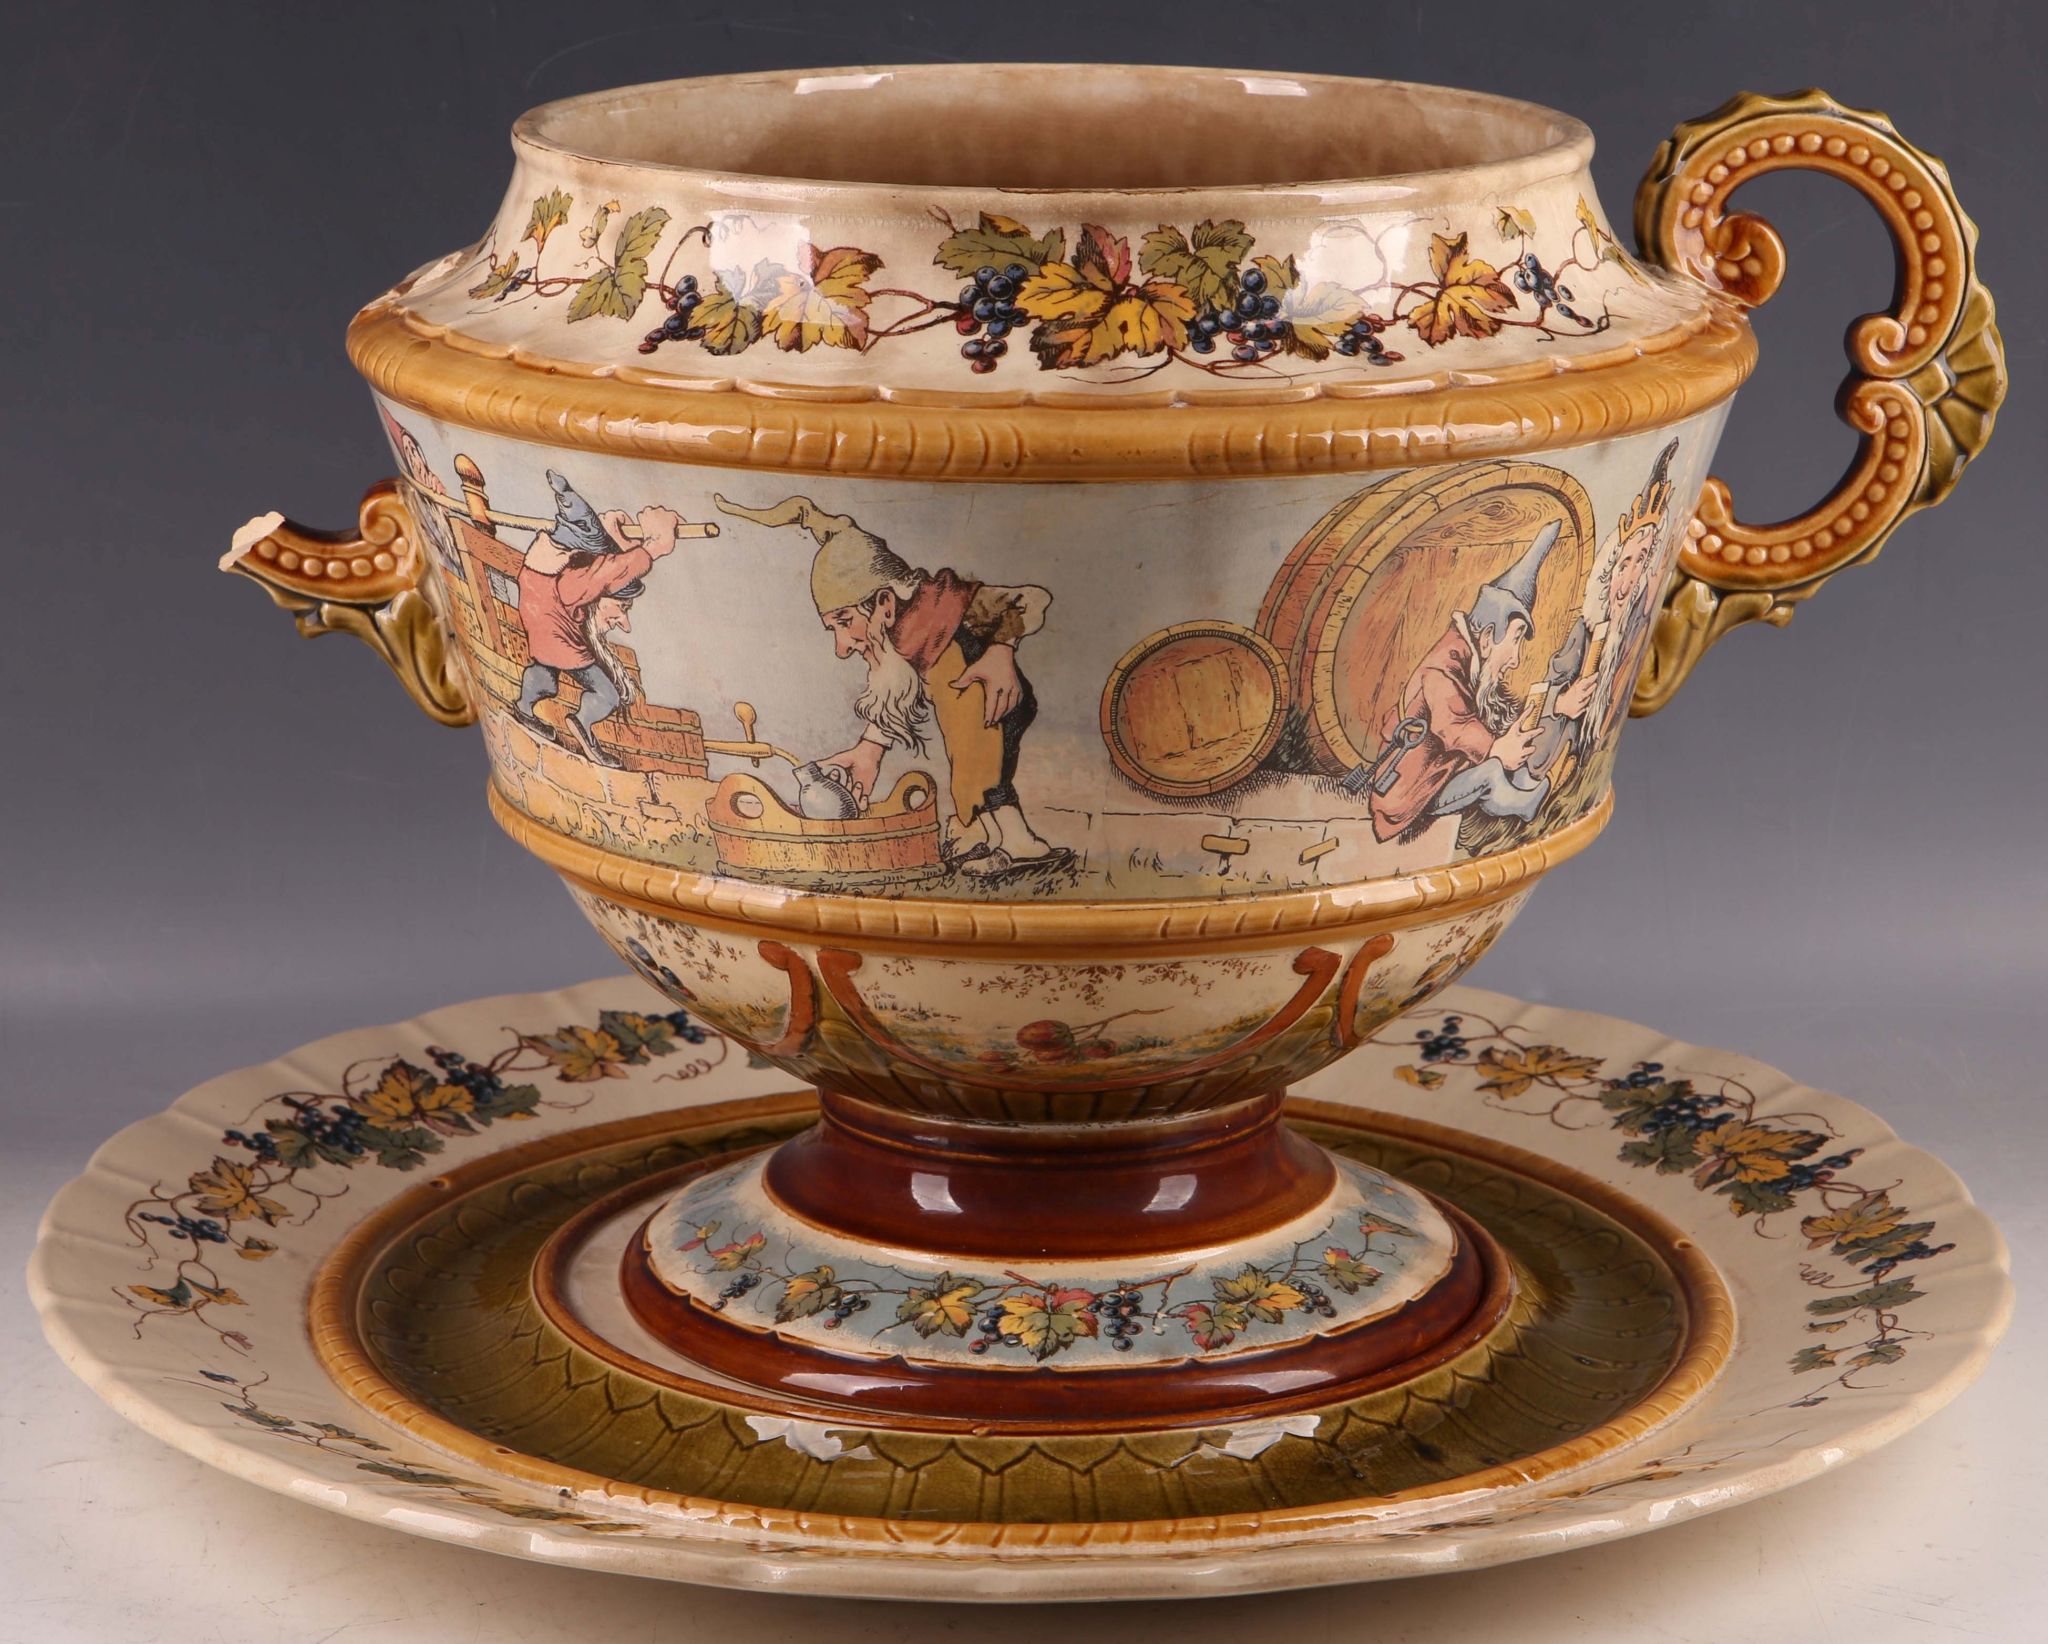 A late 19th Century Mettlach factory pottery twin-handled bowl on stand, with amusing group of